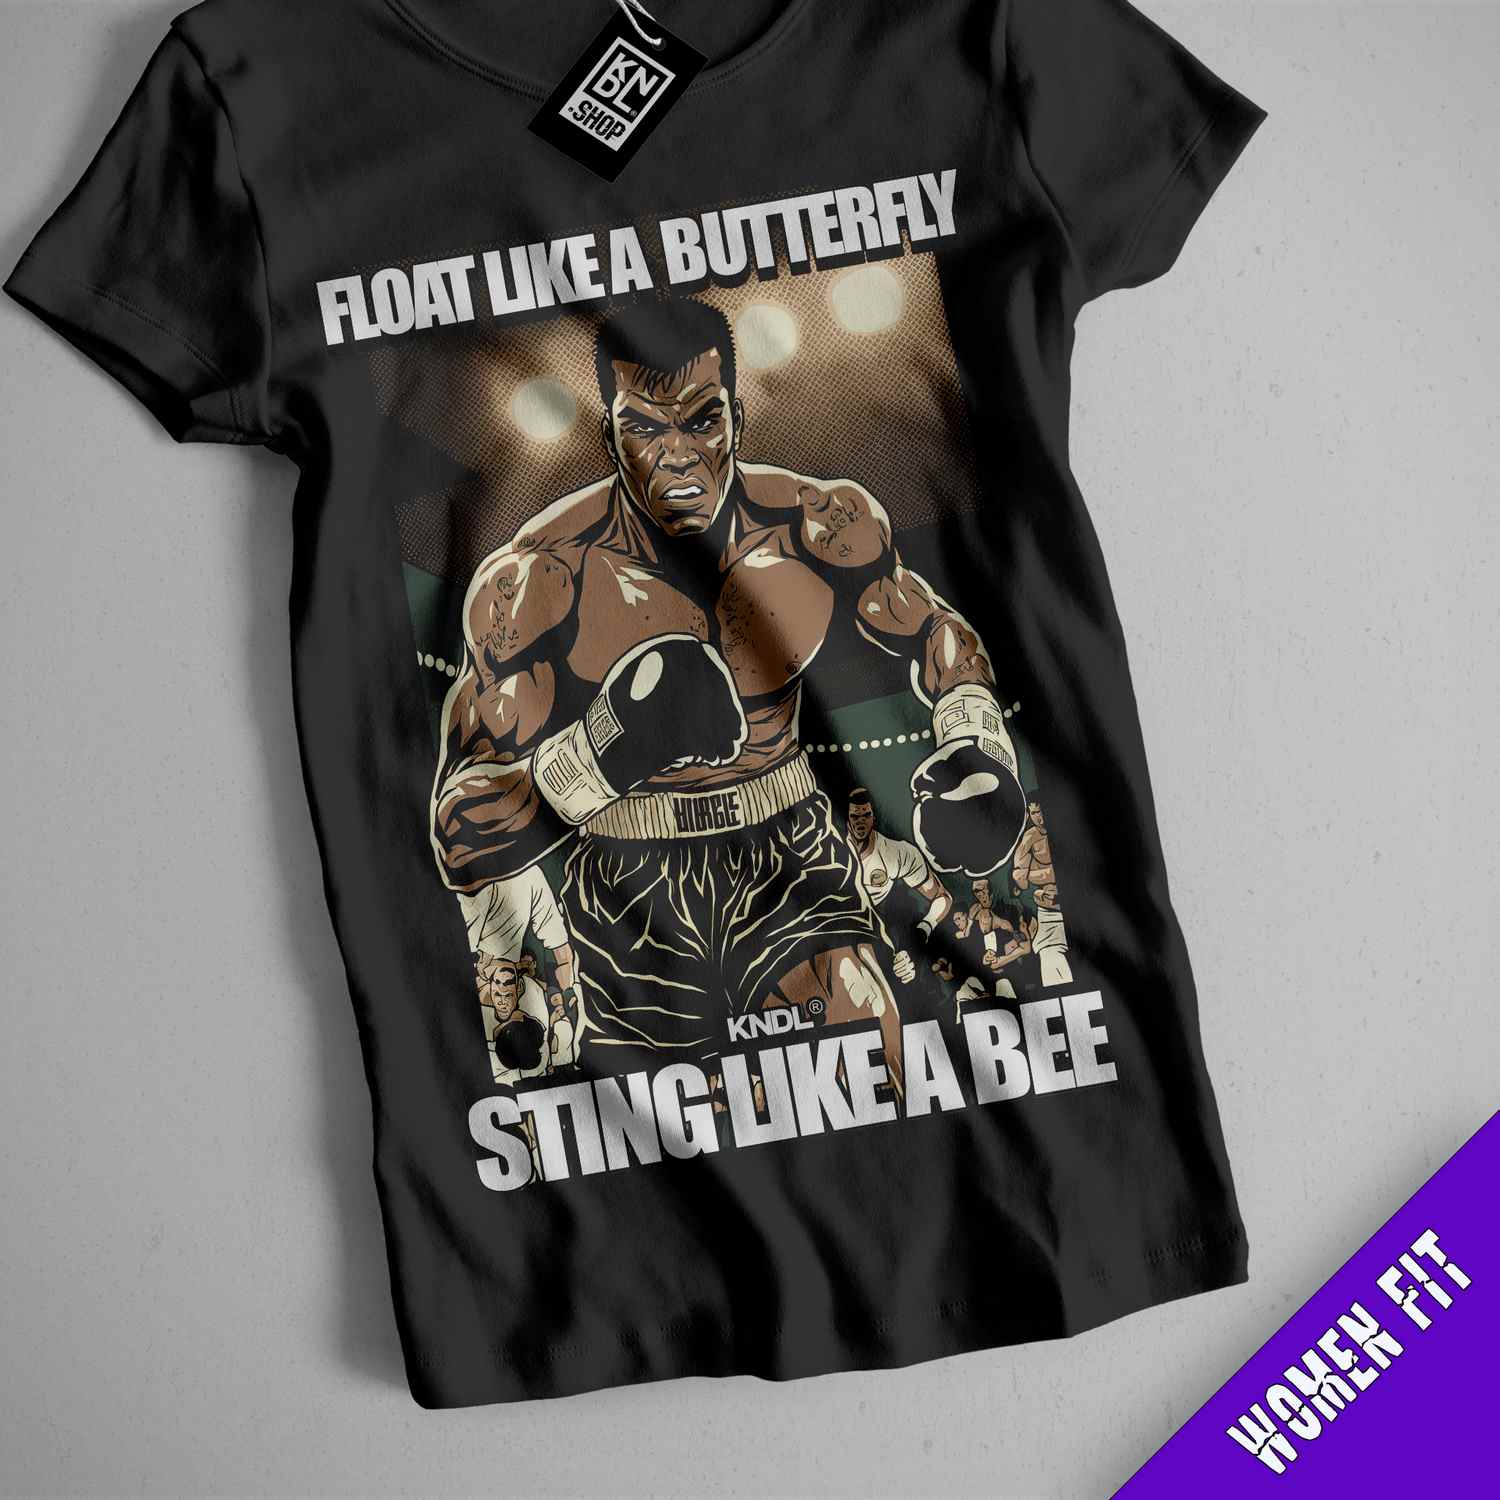 a t - shirt that says float like a butterfly sting like a bee